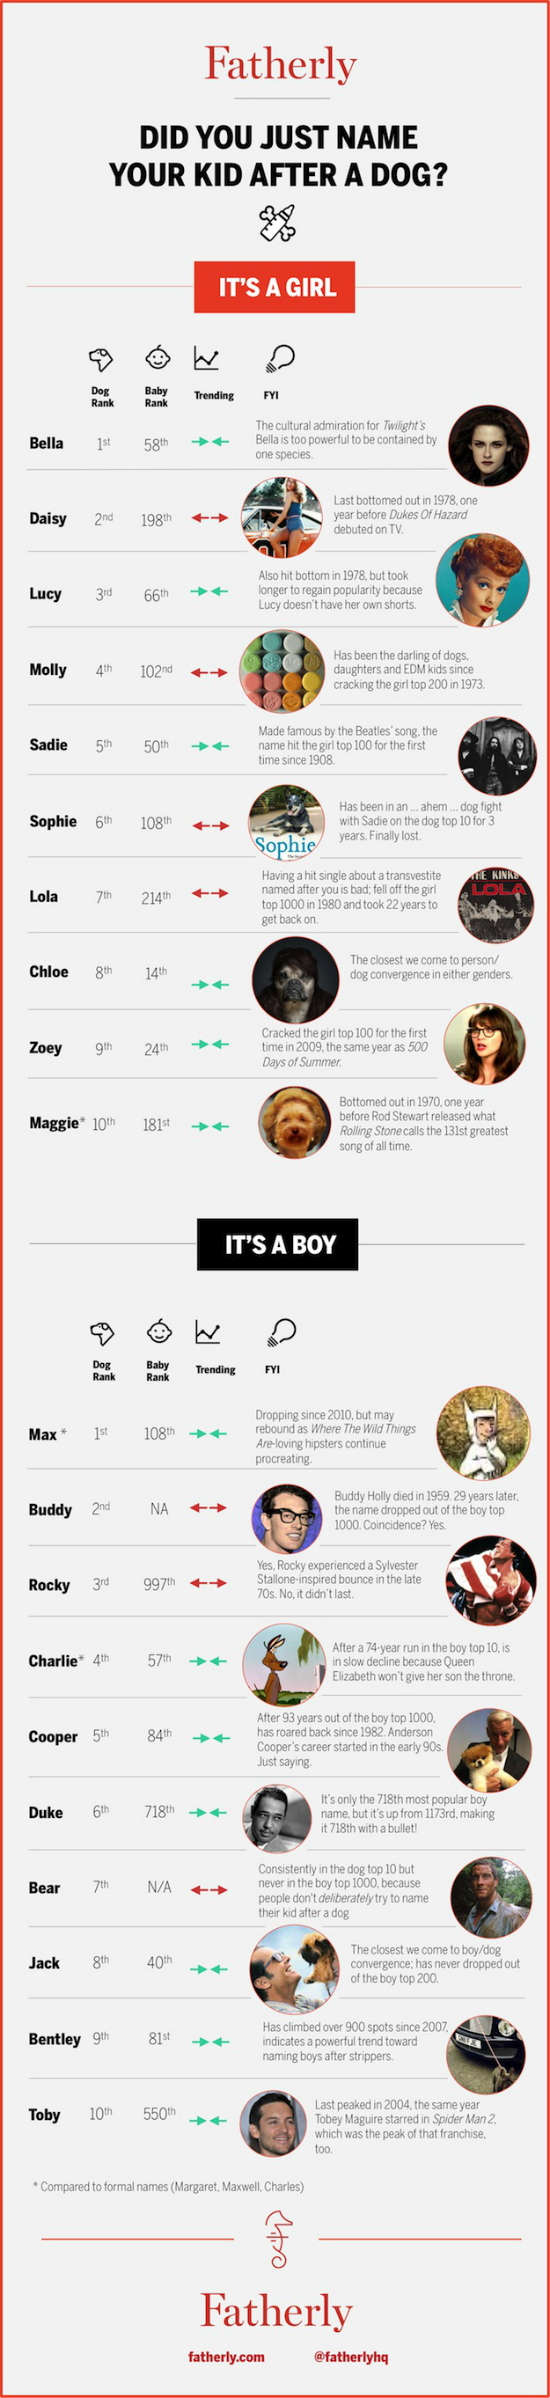 Fatherly-Infographic-Dog-and-Baby-Name-Trends3